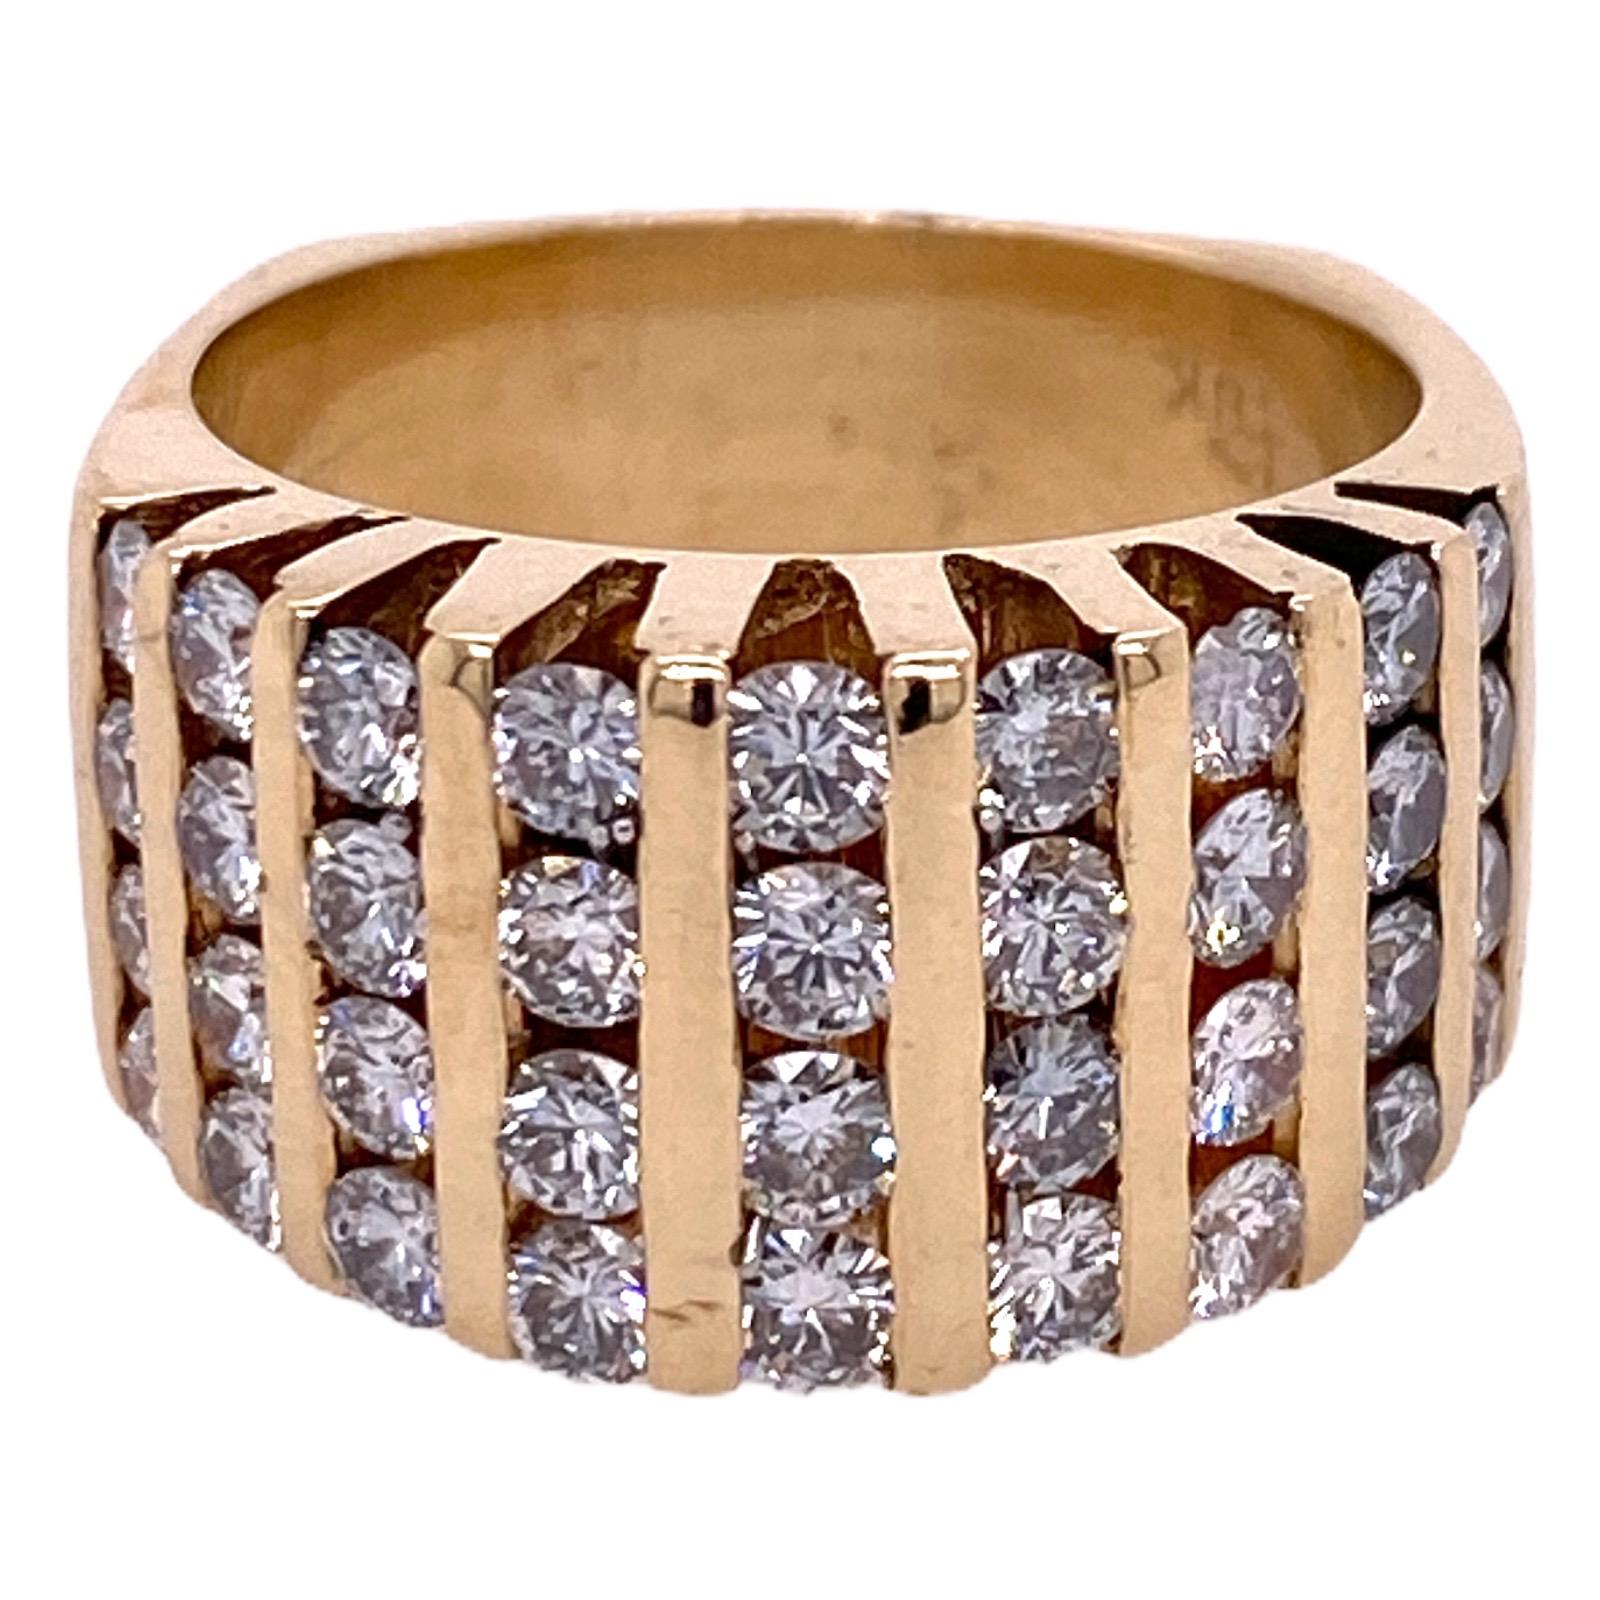 Beautiful diamond channel set band fashioned in 18 karat yellow gold. The band features 36 round brilliant cut diamonds weighing 2.00 carat total weight and graded G-H color and VS2-SI1 clarity. The band measures 10.7mm in width and is currently